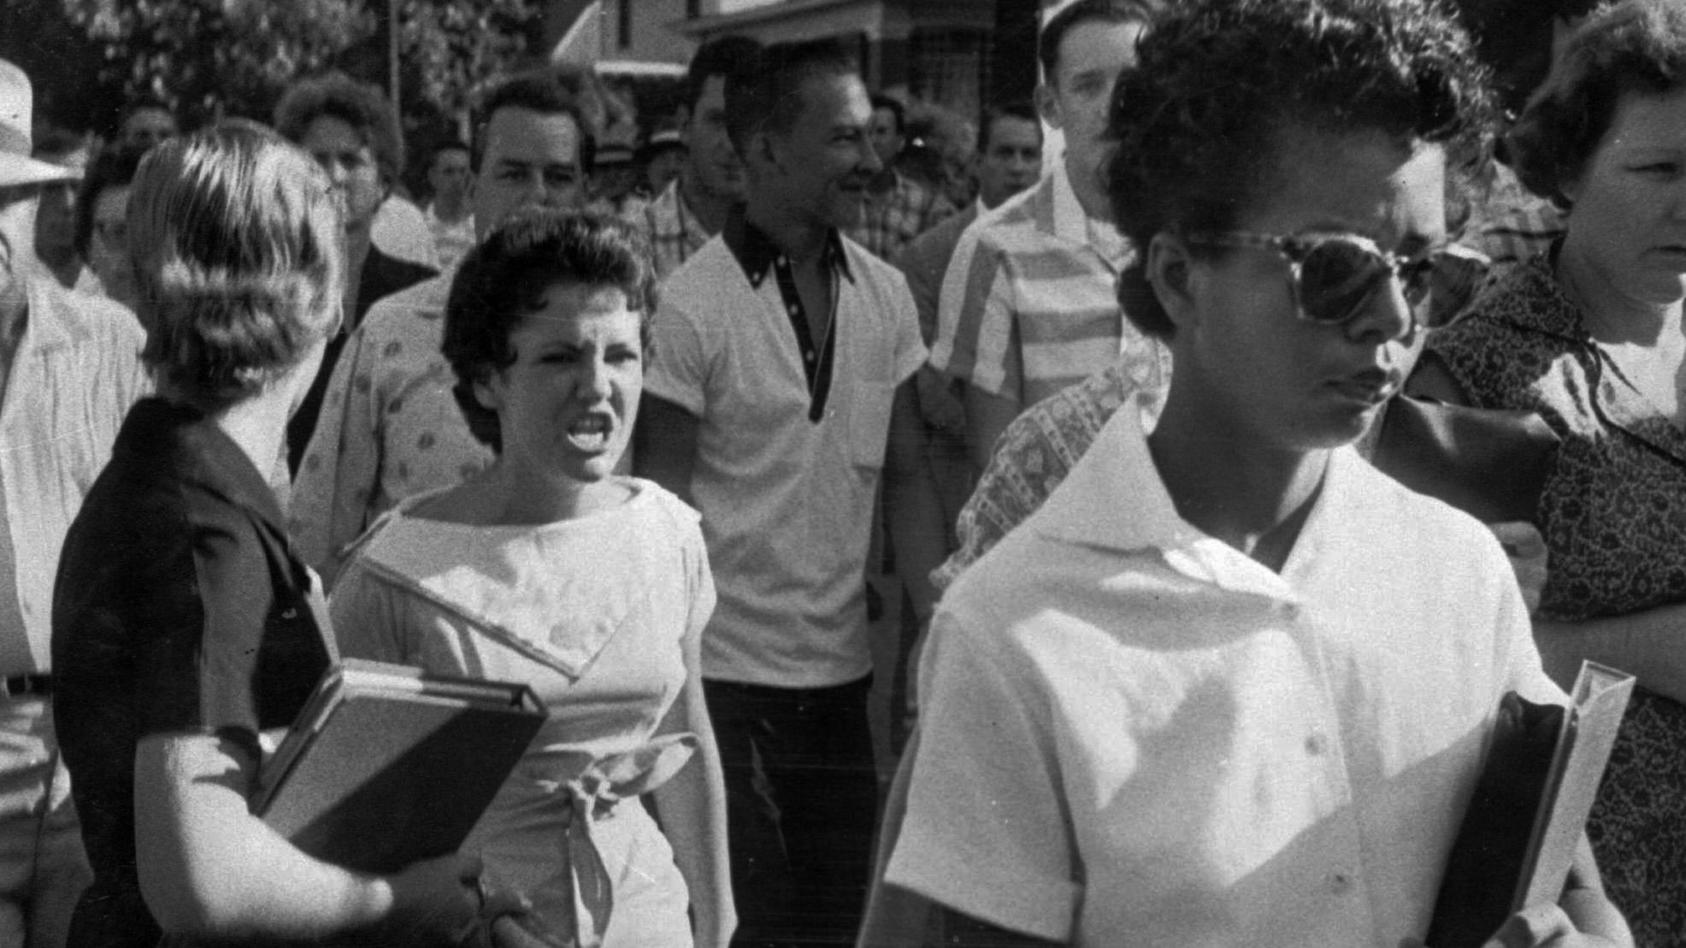 In this Sept. 4, 1957 file photo, students of Central High School in Little Rock, including Hazel Bryan, shout insults at Elizabeth Eckford as she calmly marches down to a line of National Guardsmen